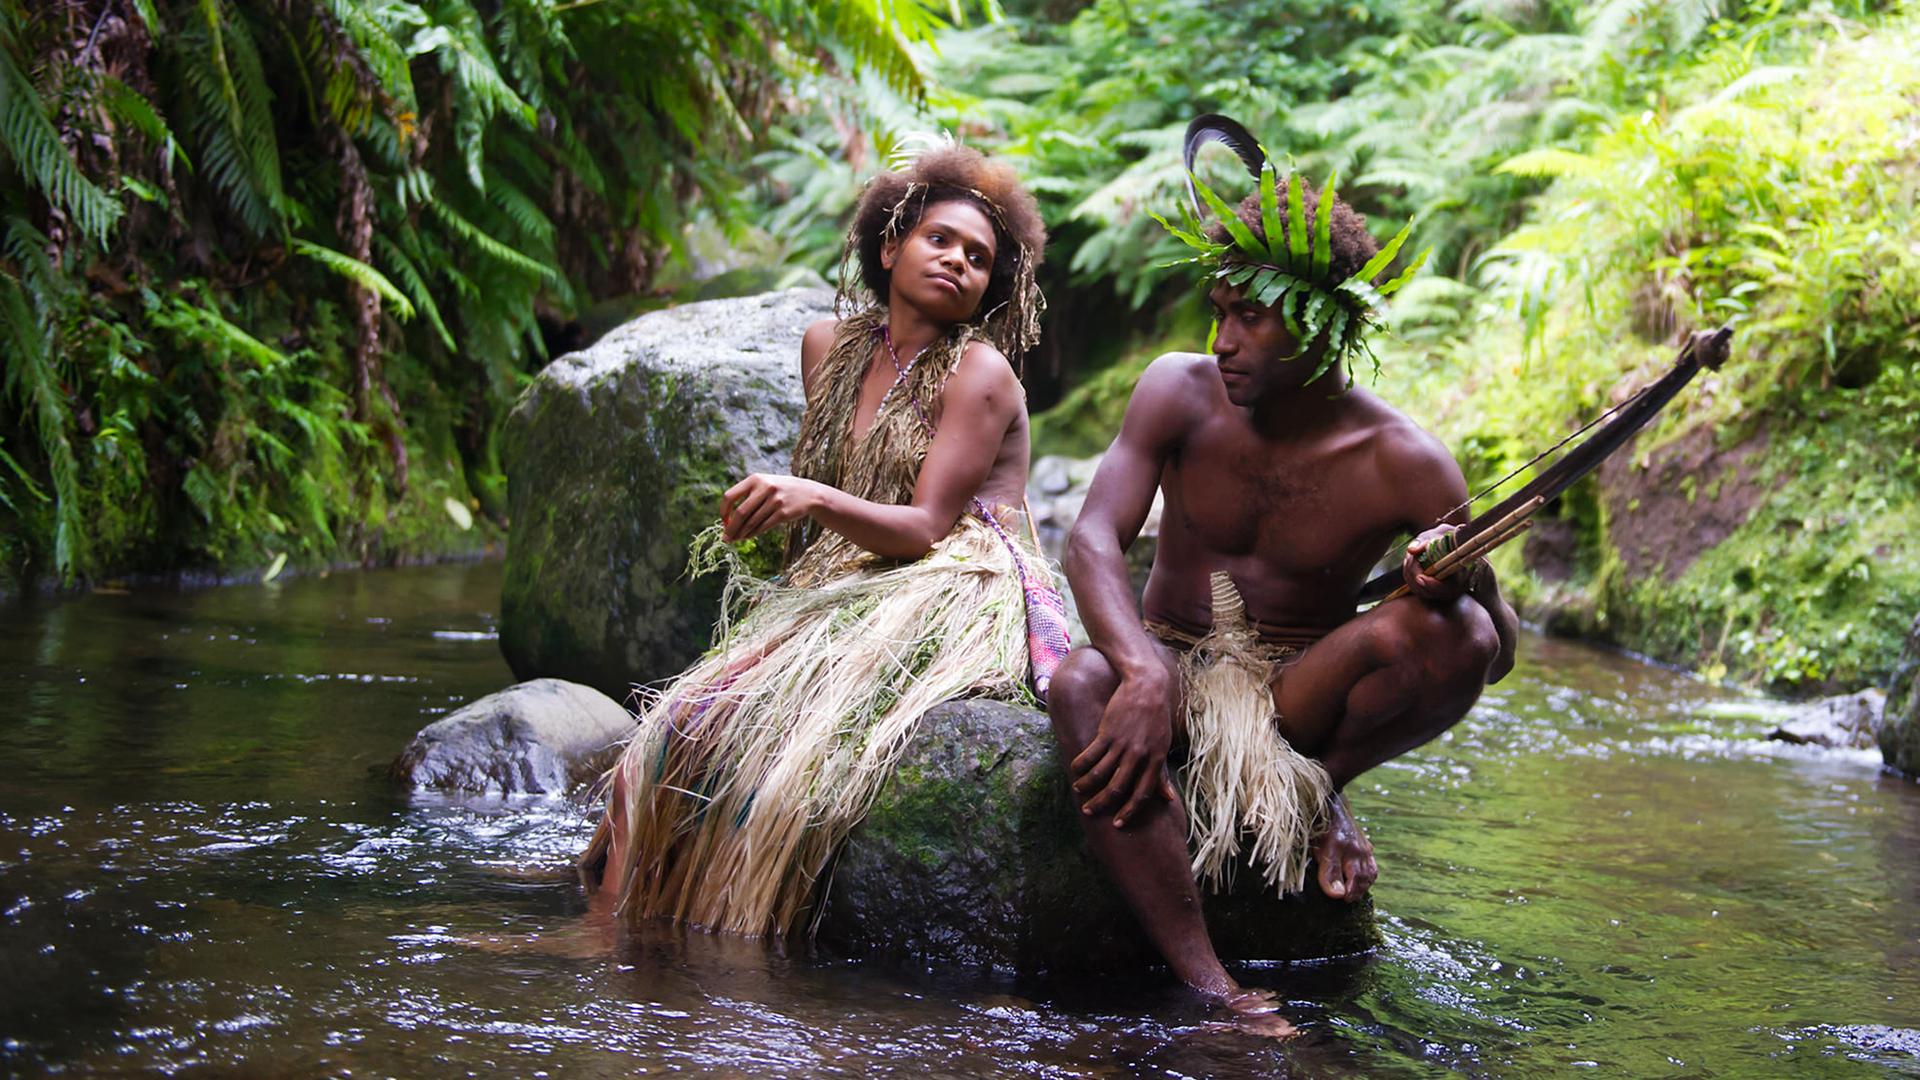 The movie Tanna has been described as a sort of Romeo and Juliet set in Oceania – on the island nation of Vanuatu.